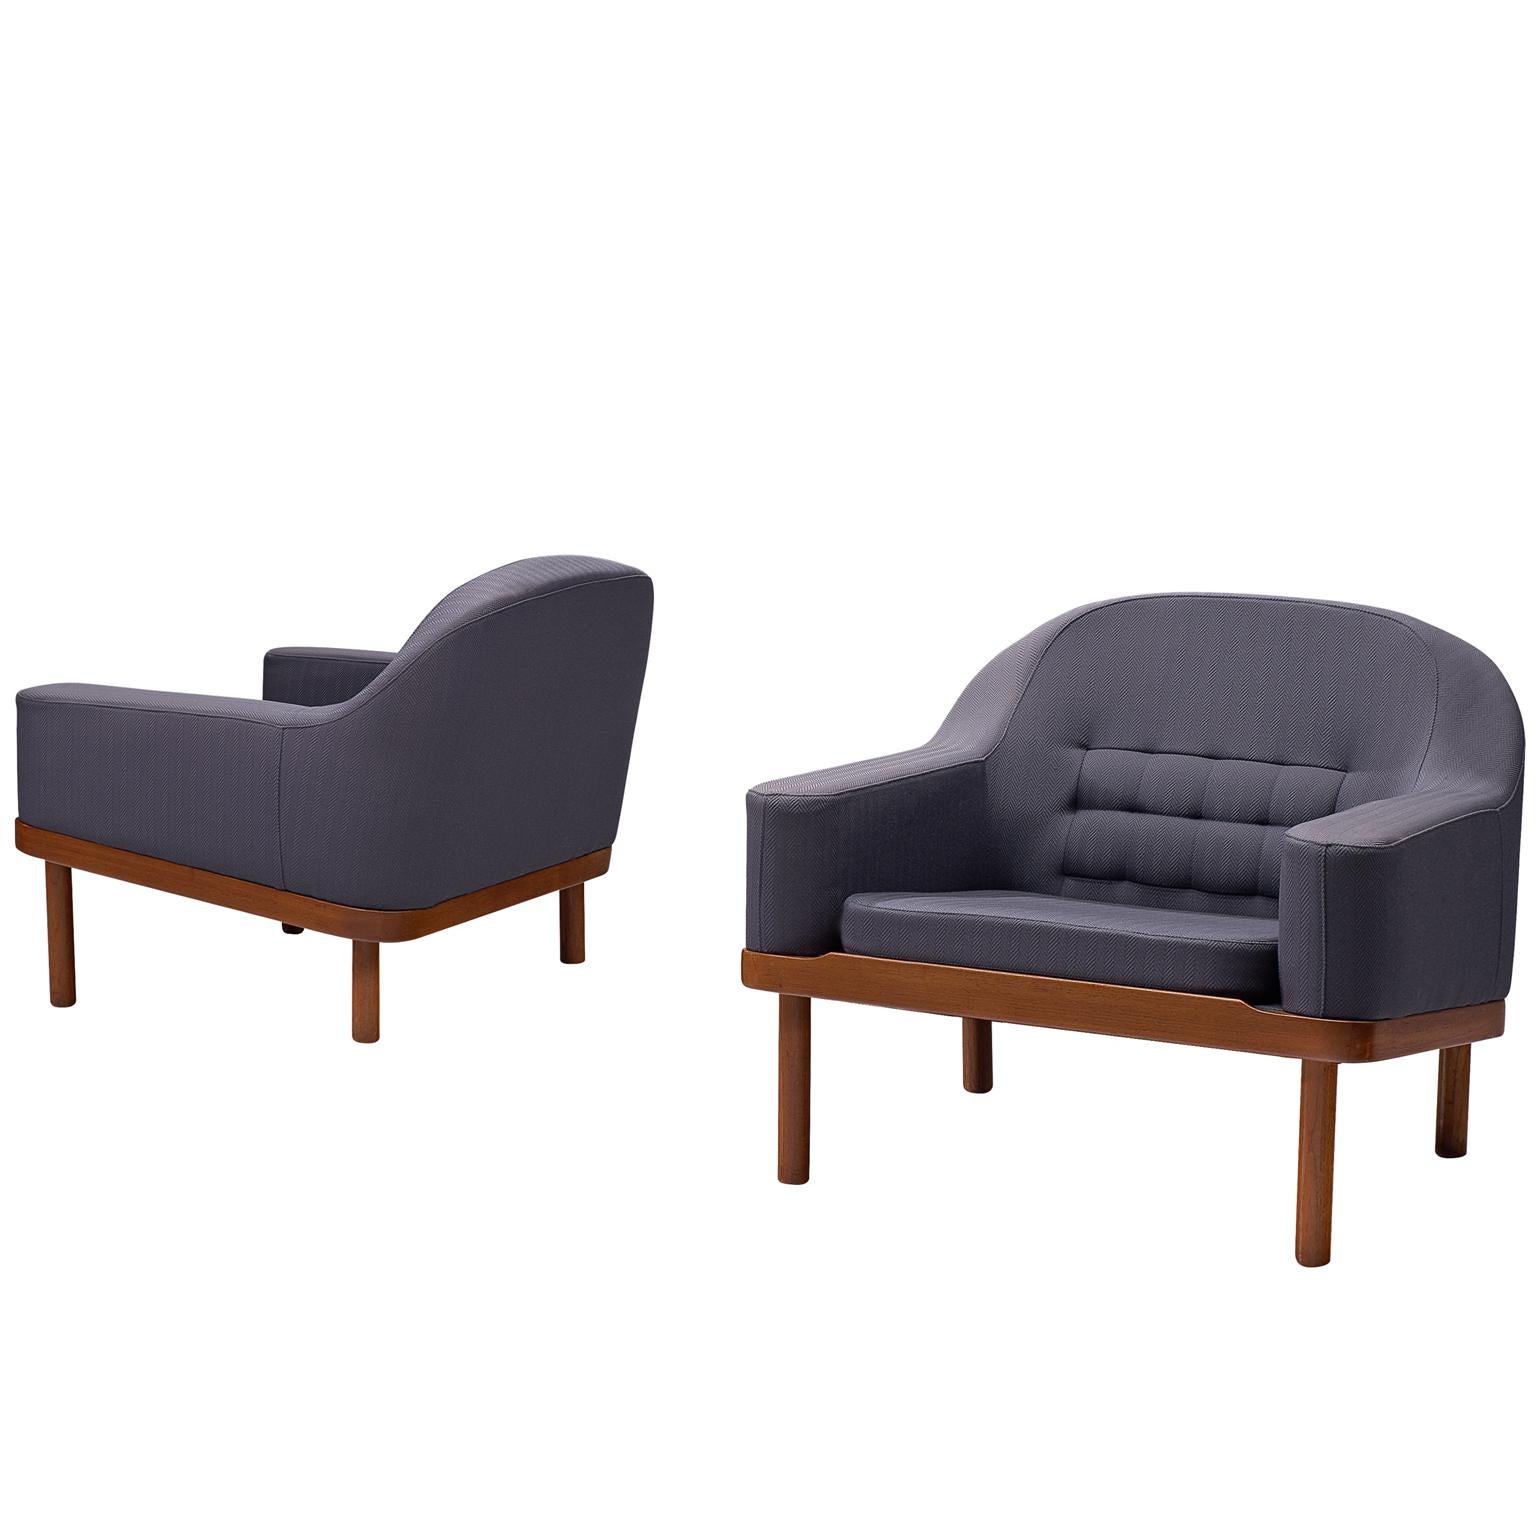 Pair of Scandinavian Lounge Chairs in Teak and Fabric Upholstery